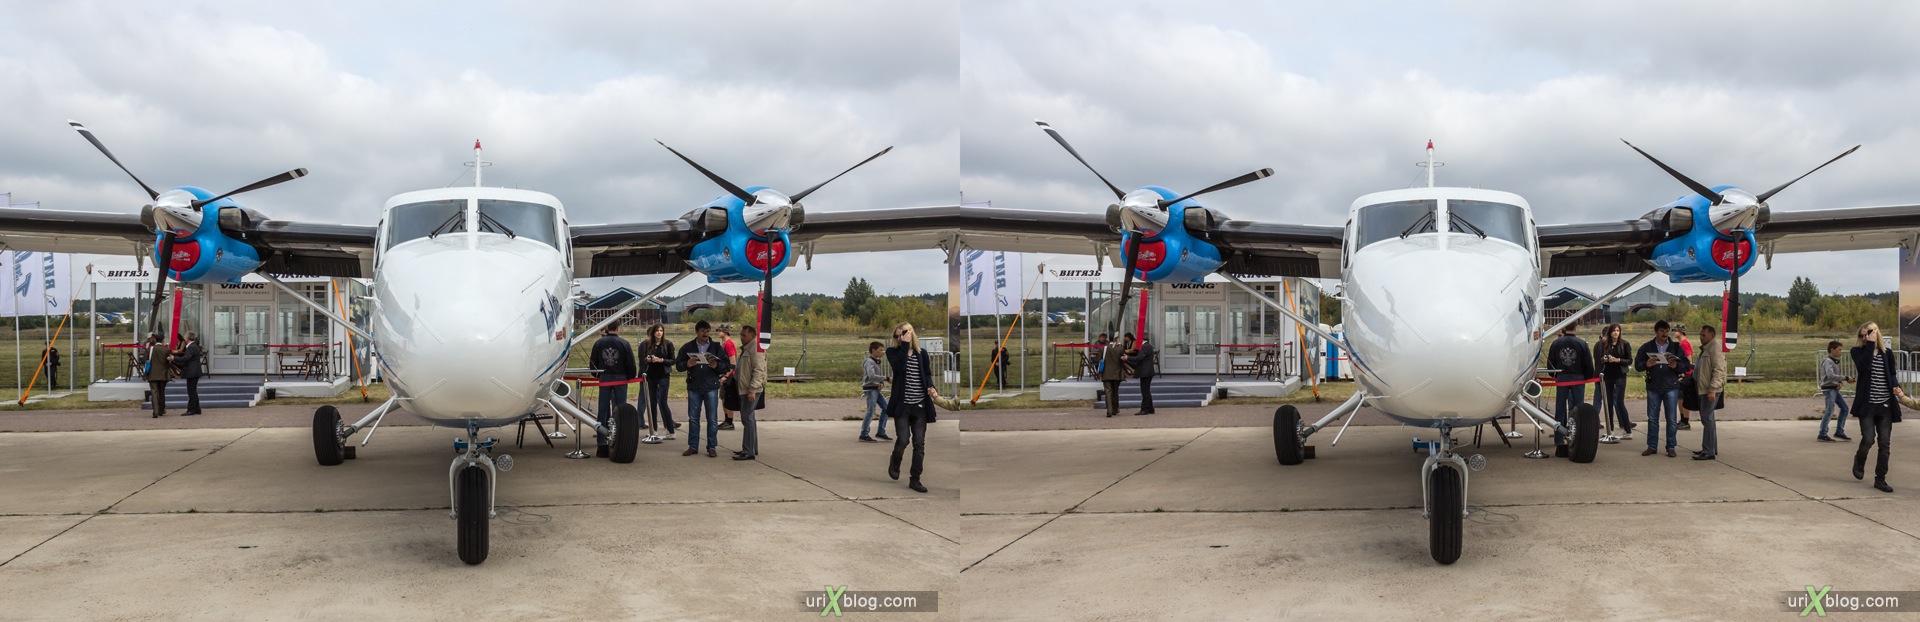 2013, Series 400 Twin Otter, MAKS, International Aviation and Space Salon, Russia, Ramenskoye airfield, airplane, 3D, stereo pair, cross-eyed, crossview, cross view stereo pair, stereoscopic